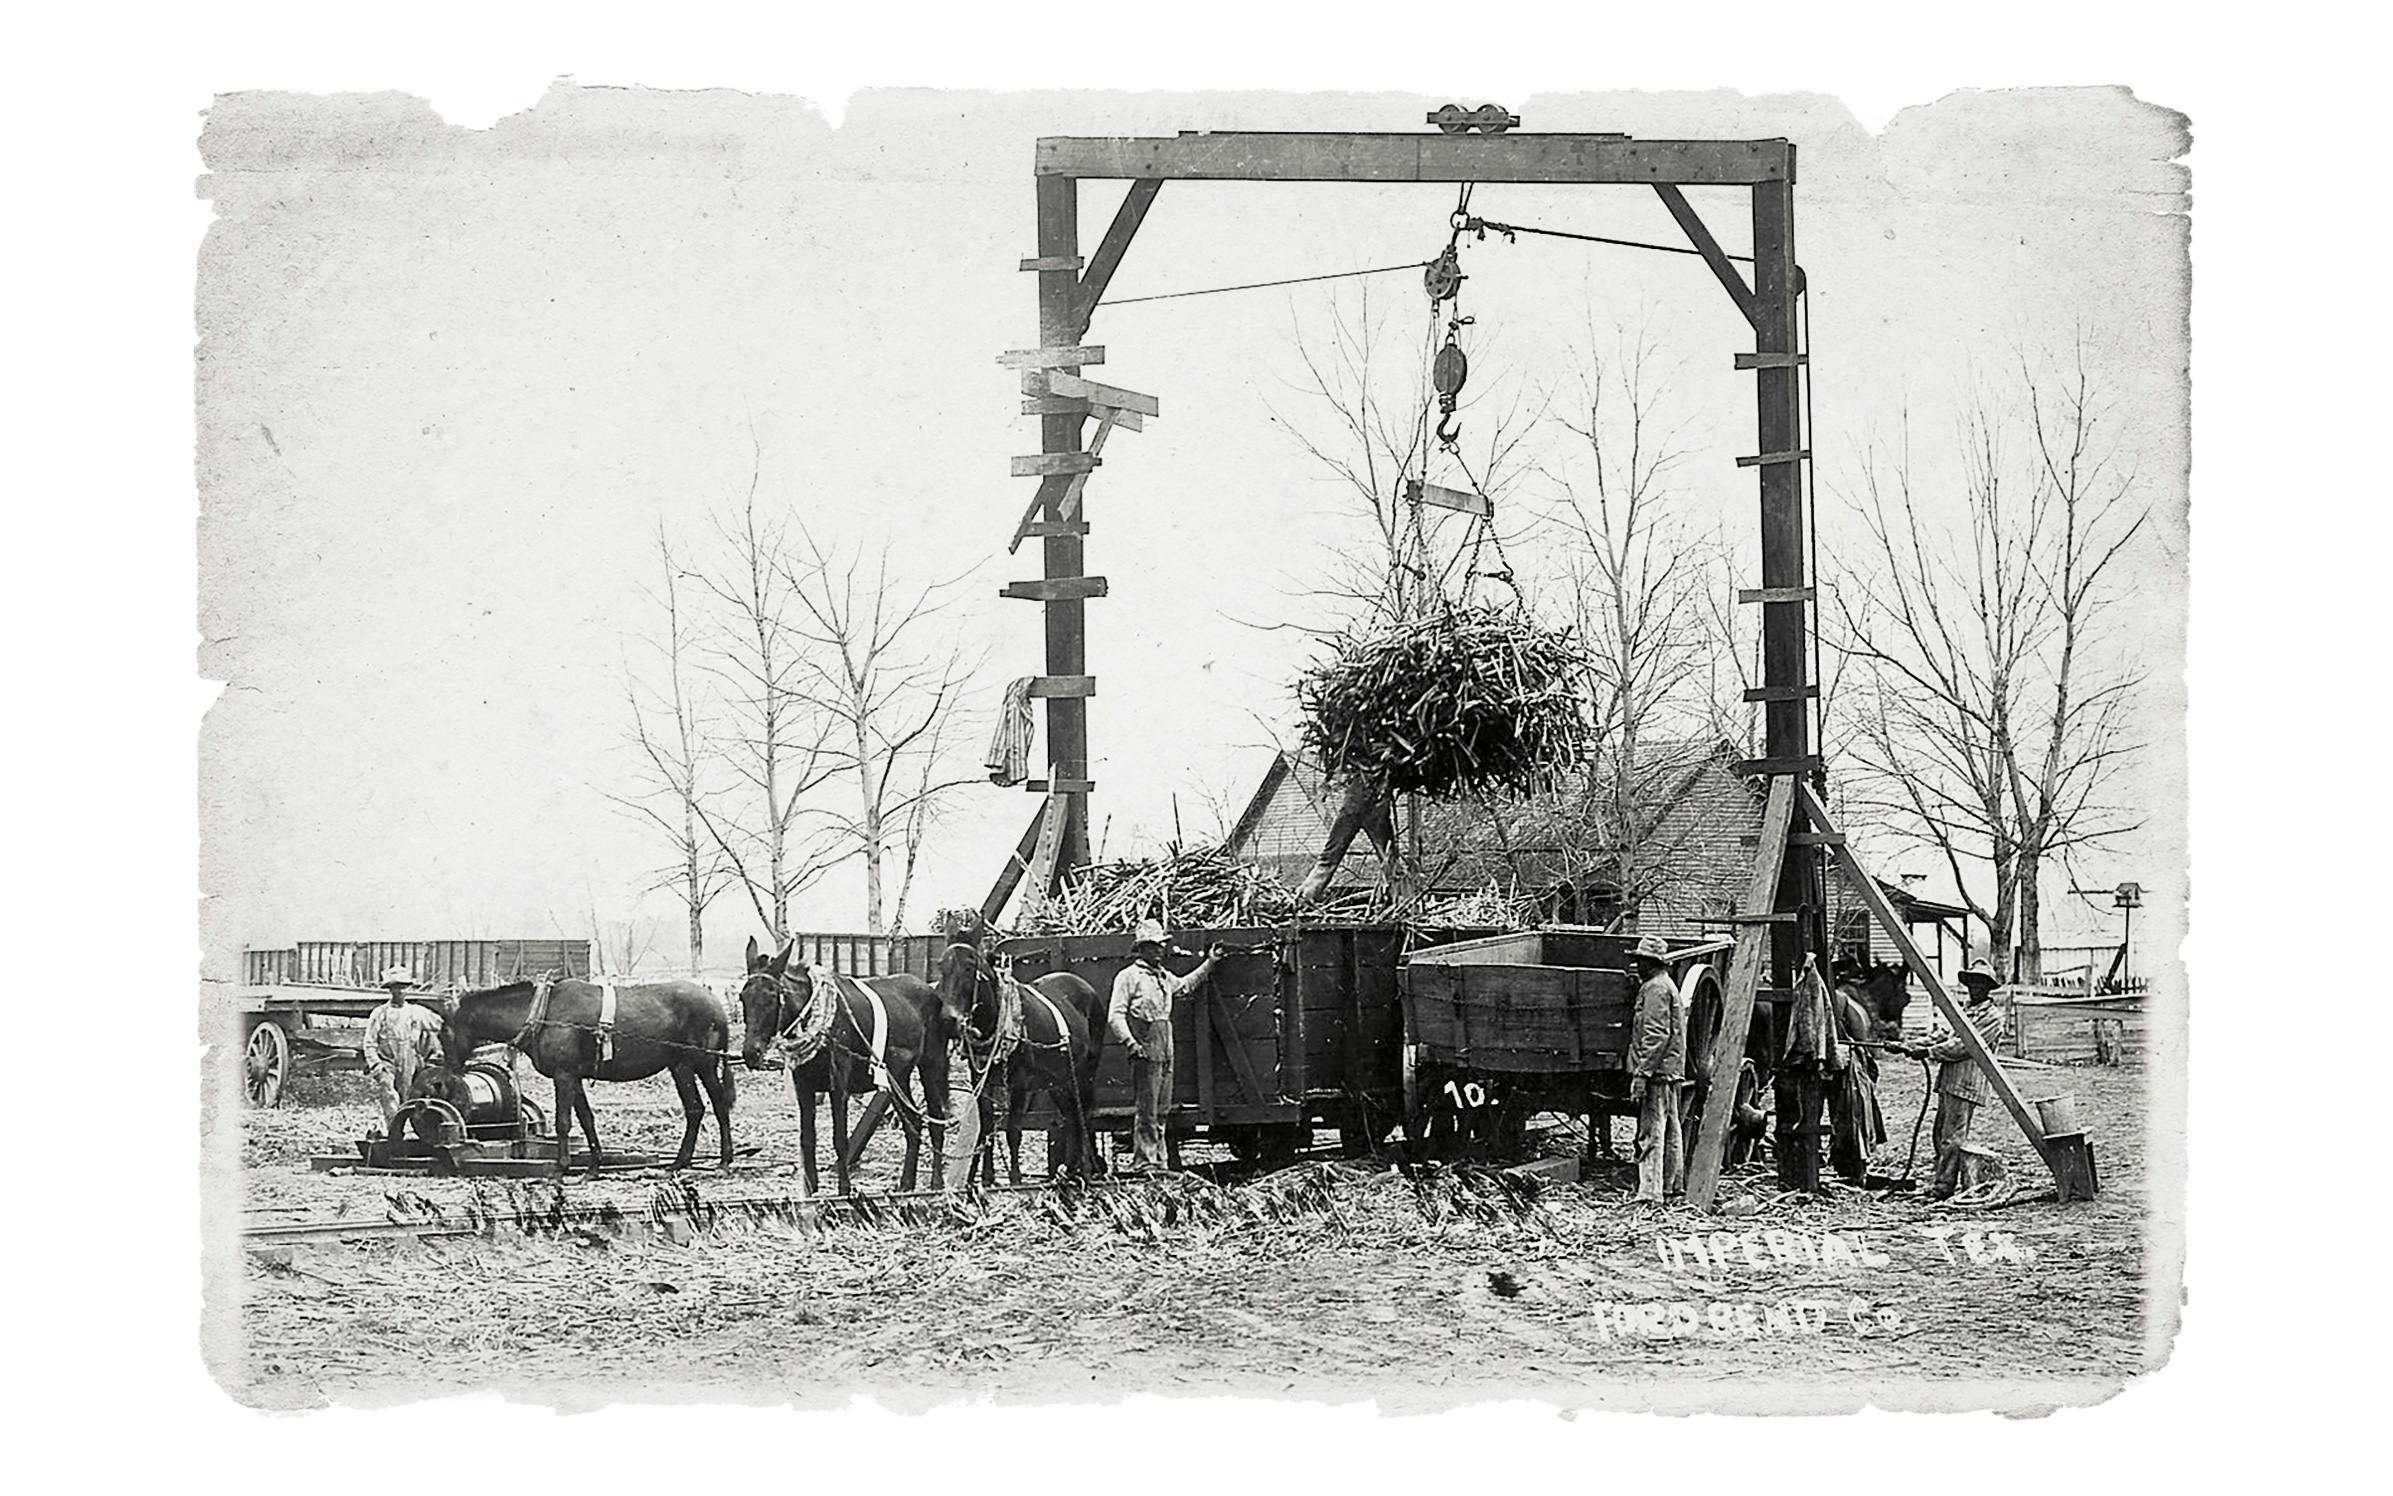 Convicts unloading a cane car at the Imperial Sugar Company’s mill sometime around 1900.